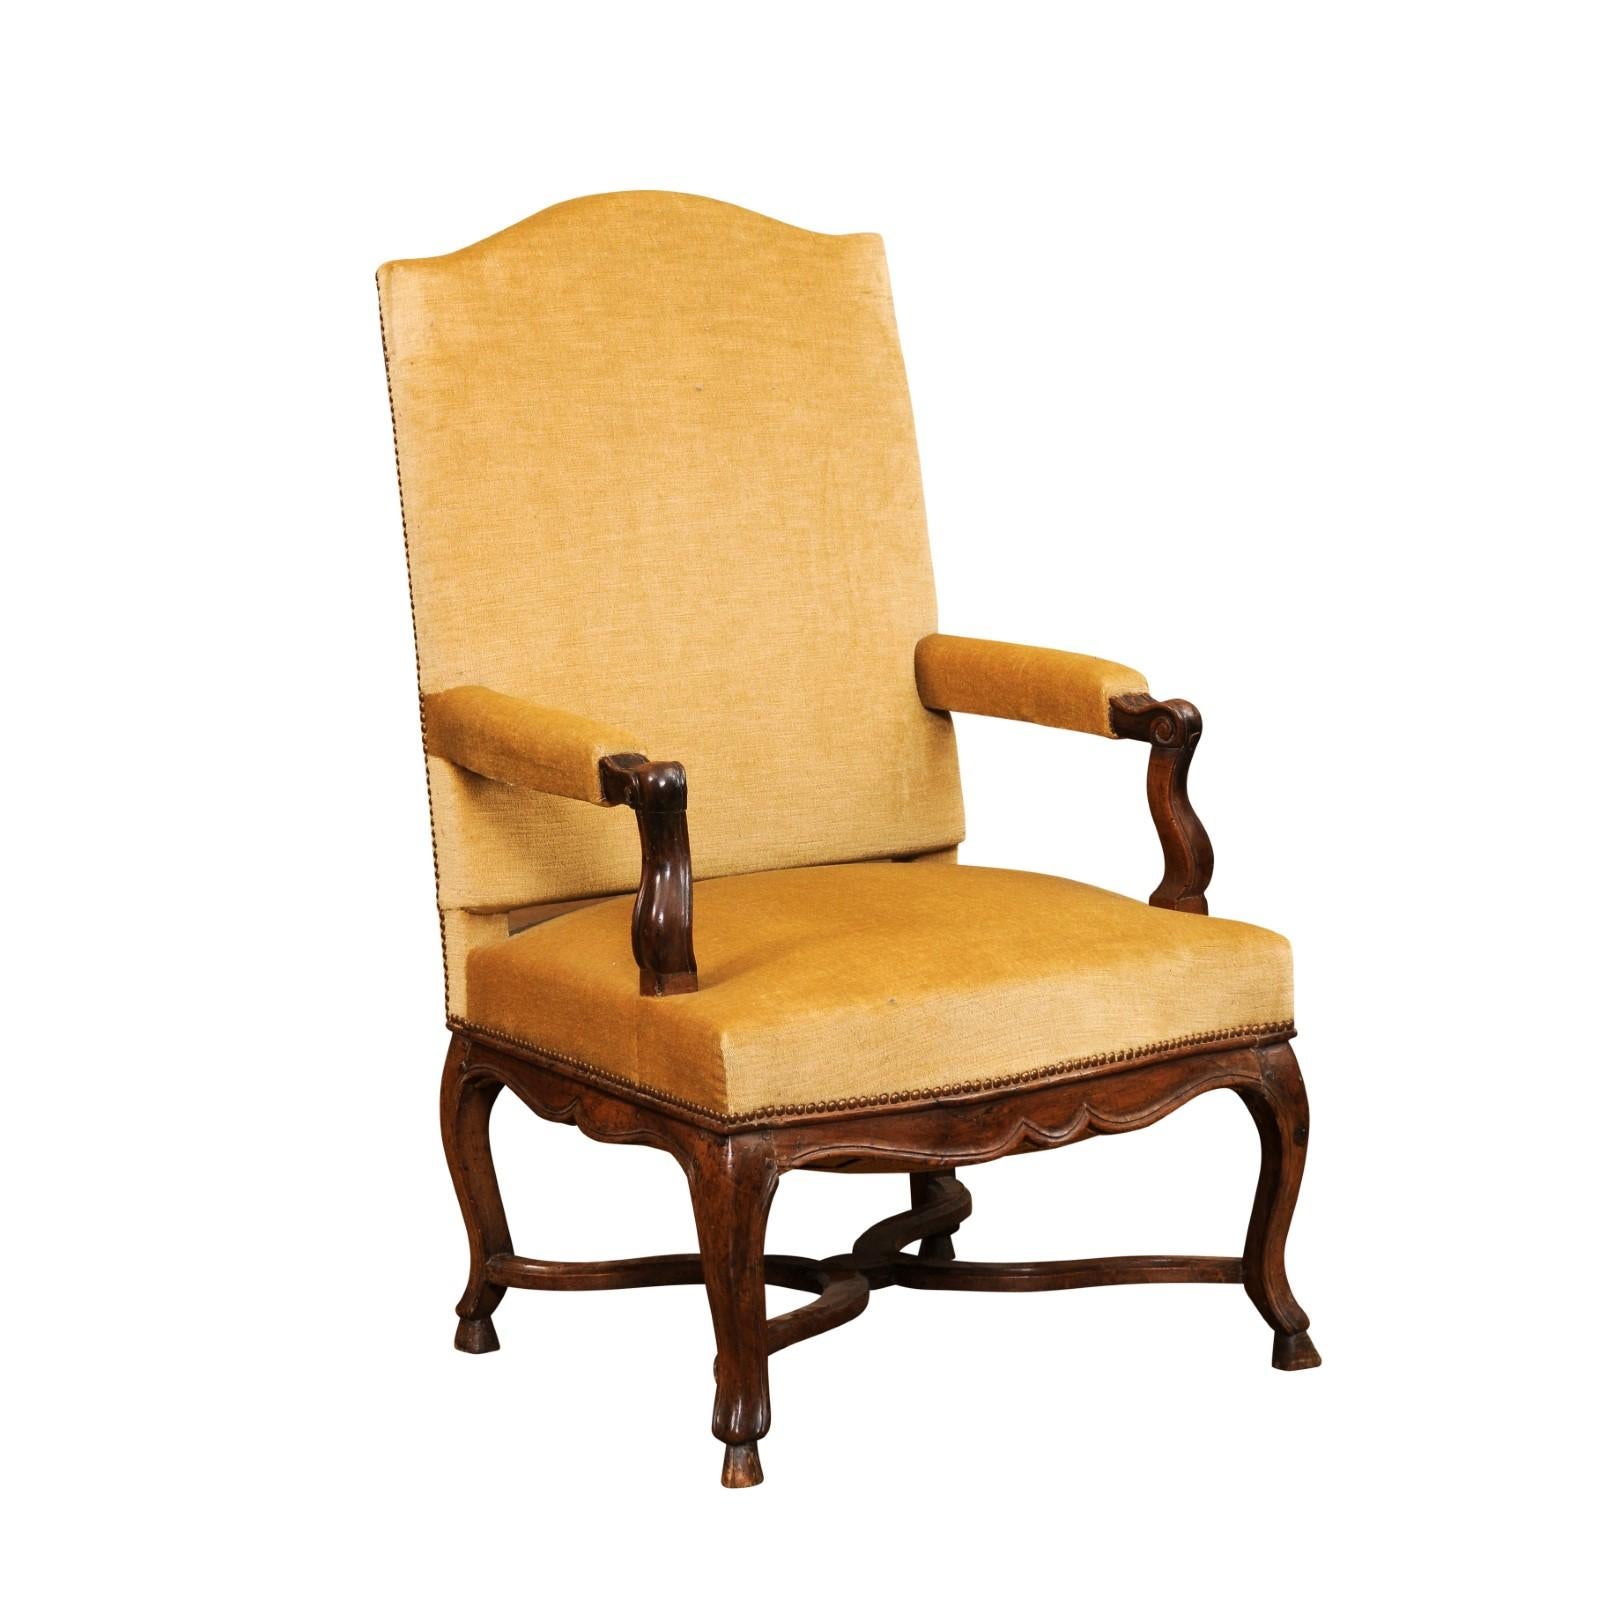 A large French Régence style walnut fauteuil circa 1790 with tall slanted back, open arms with scrolling knuckles, scalloped apron, cabriole legs, hoof feet and curving X-Form stretcher. Immerse yourself in historical elegance with this French